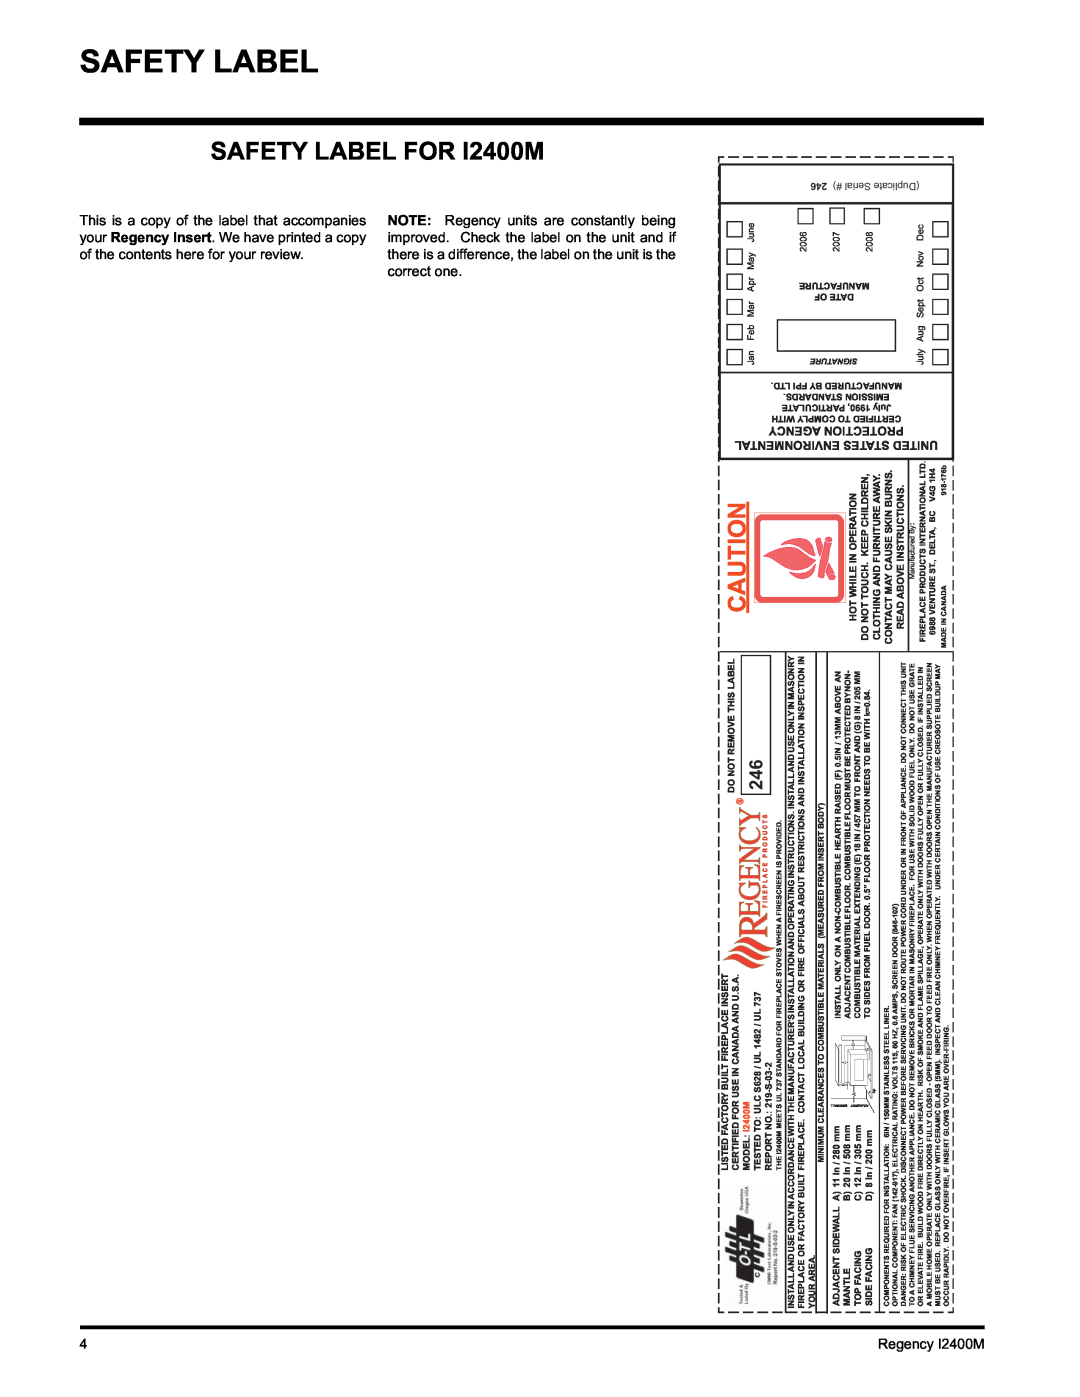 Regency Wraps Safety Label, SAFETY LABEL FOR I2400M, of the contents, your Regency, United States Environmental, 2006 